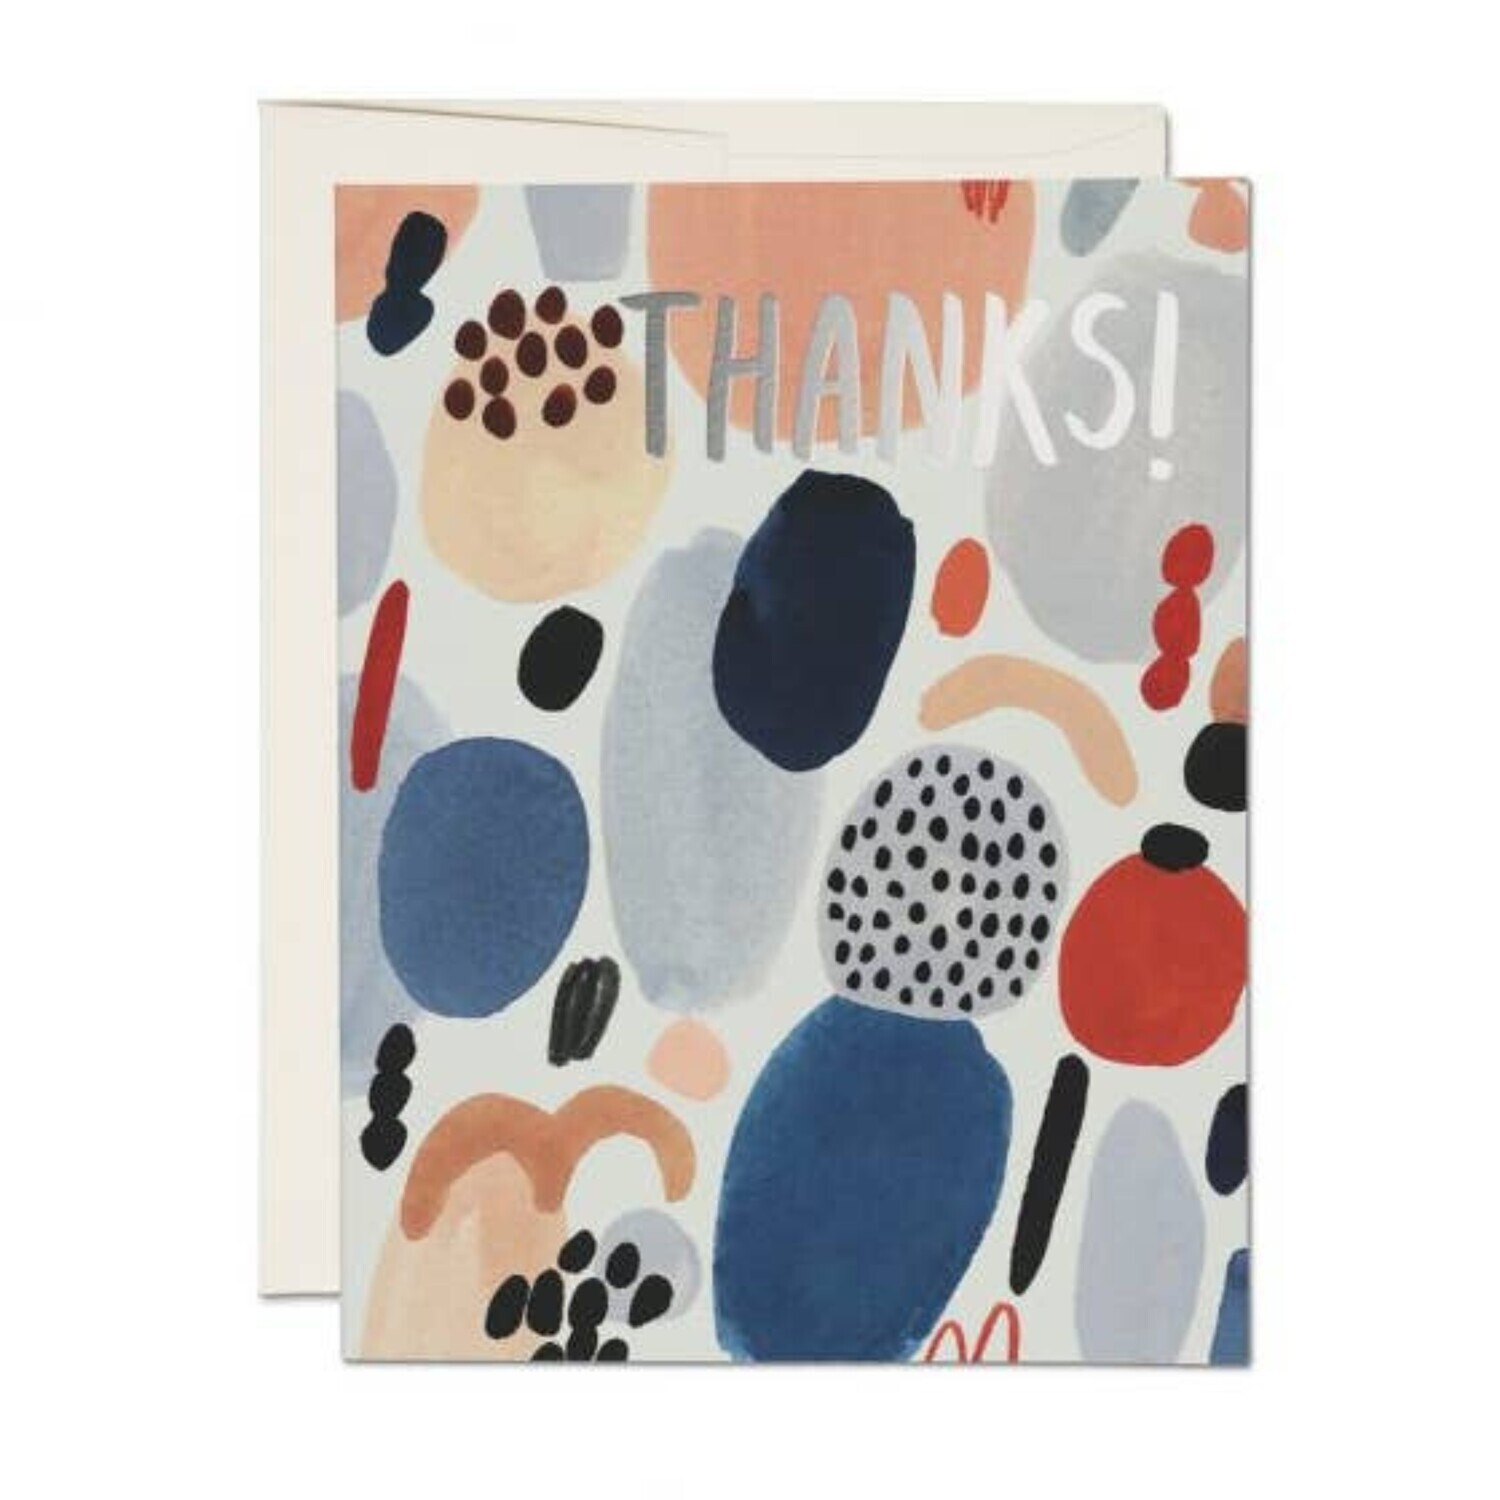 ABSTRACT THANK YOU CARD